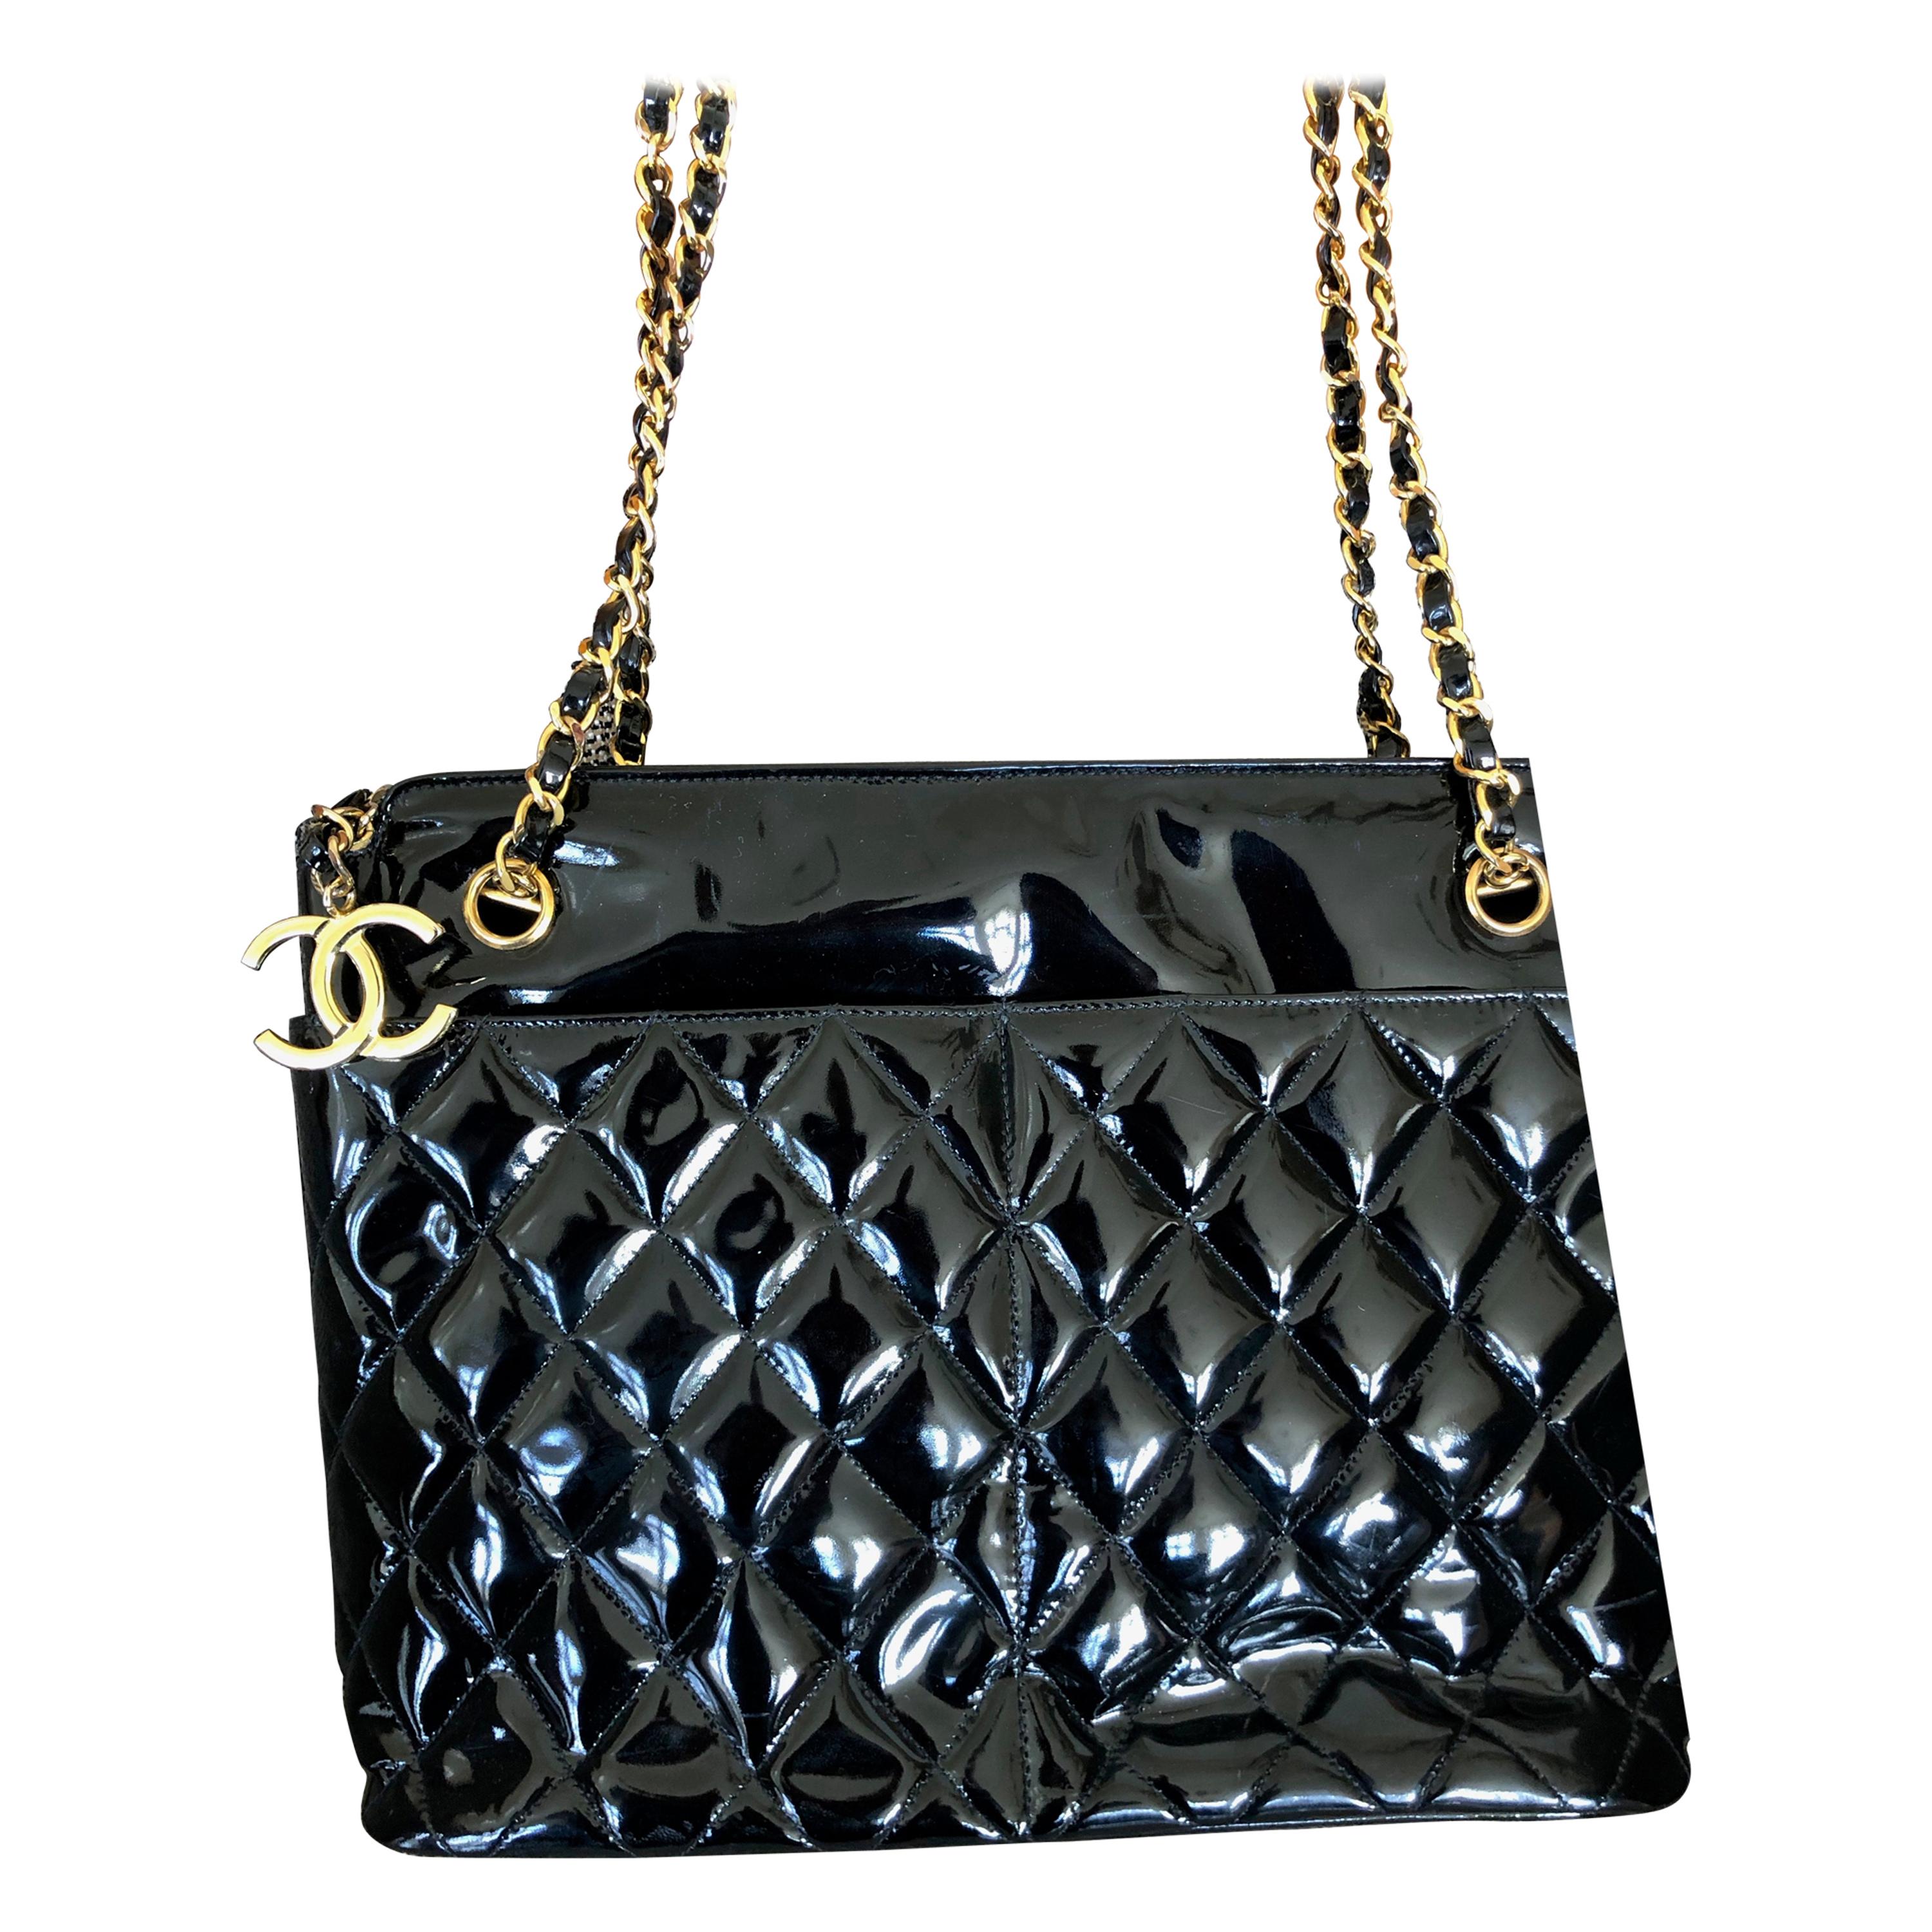 Chanel Black Quilted Patent Leather Tote Bag with Gold Chain and Hardware For Sale